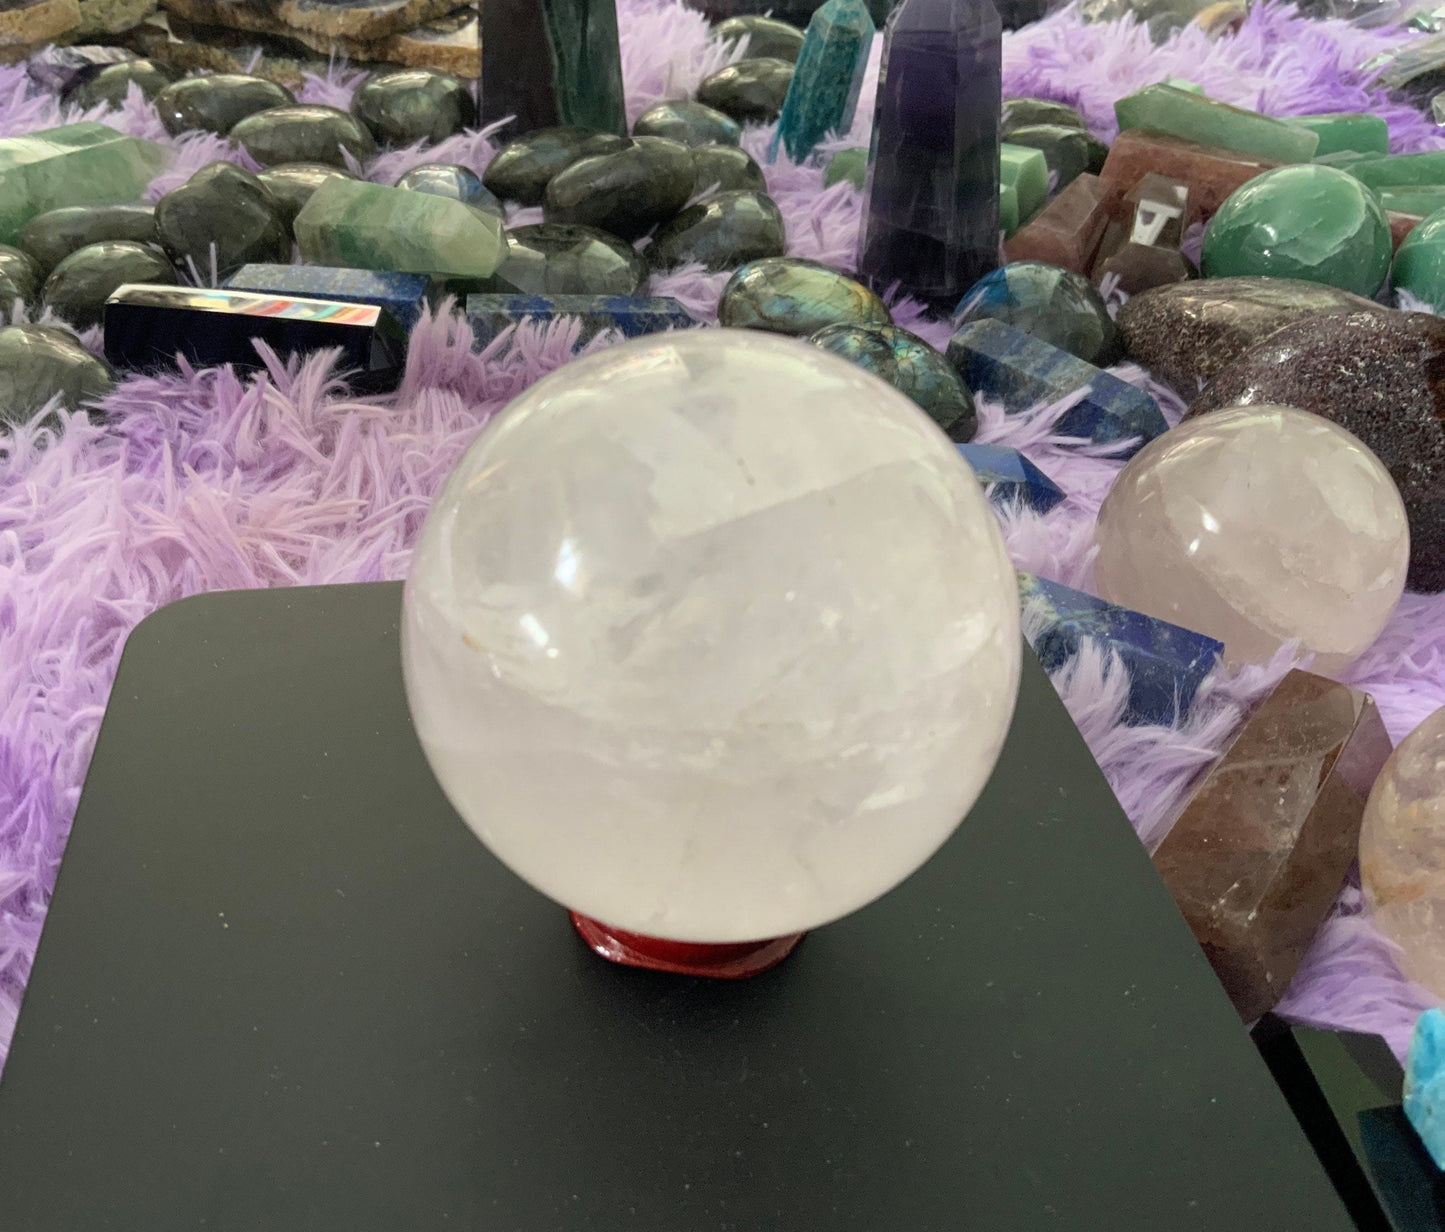 Beautiful 1 pound 4 oz clear quartz sphere crystal ball with wooden stand